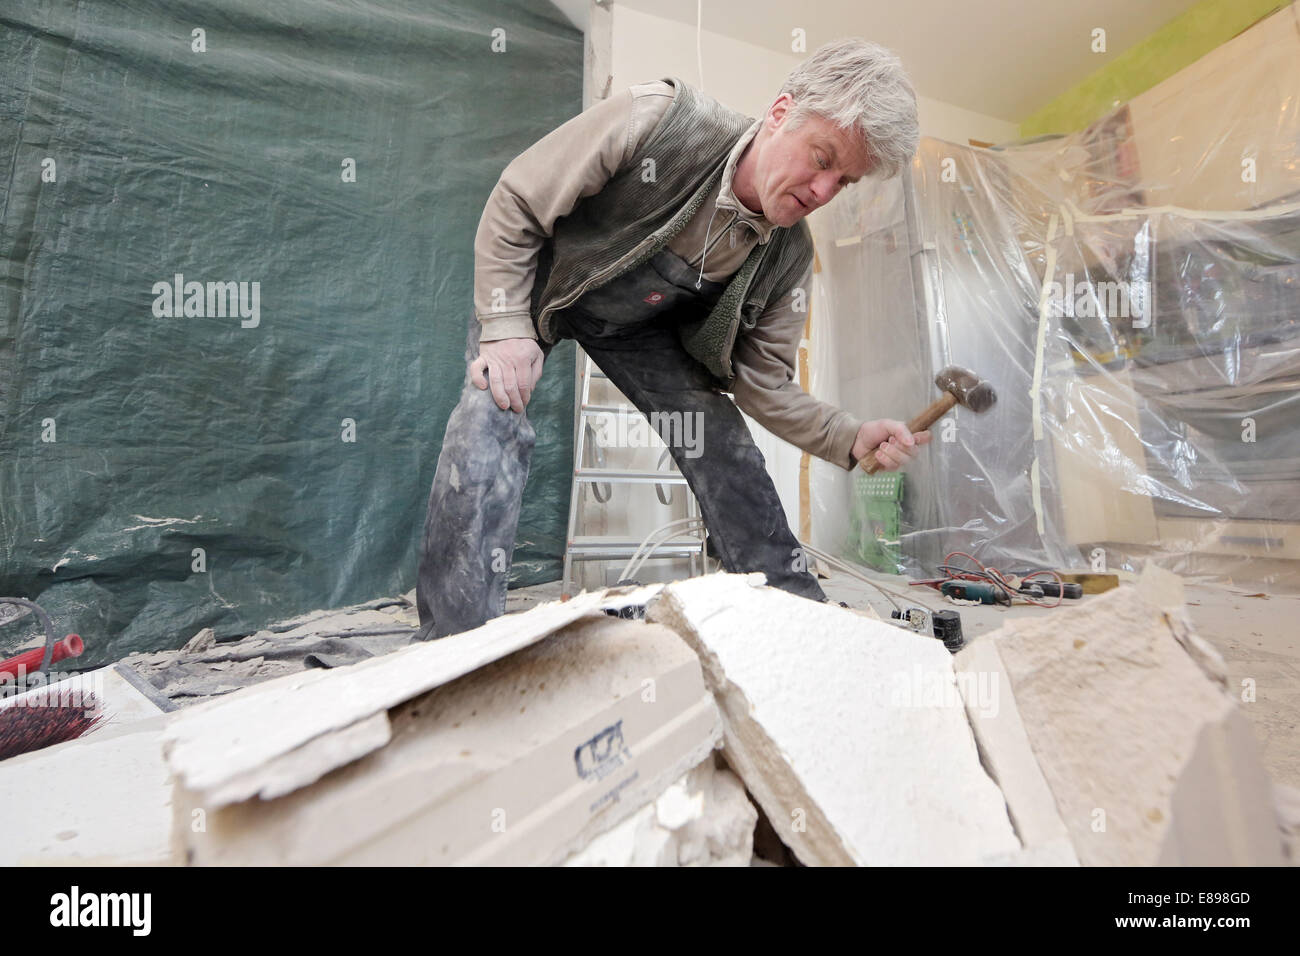 Berlin, Germany, craftsmen smashes bricks with a hammer Stock Photo